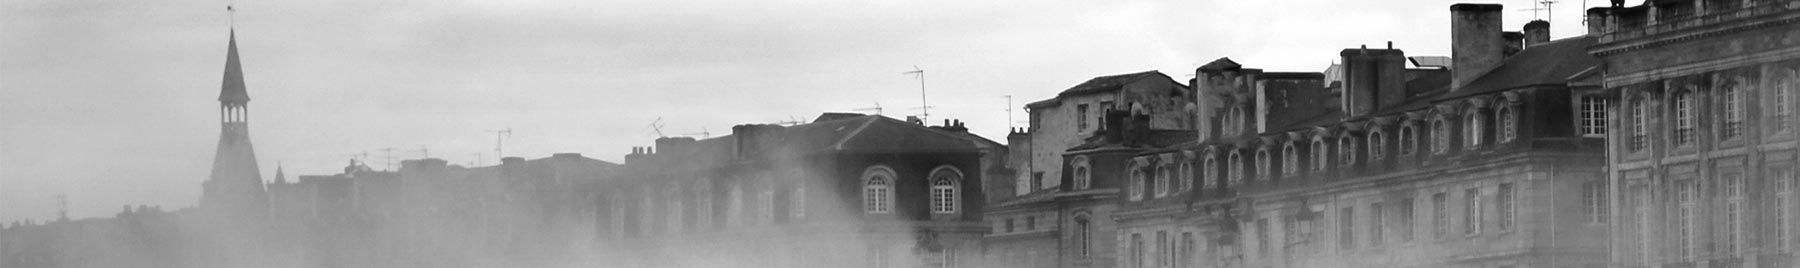 black and white photo of buildings in the mist